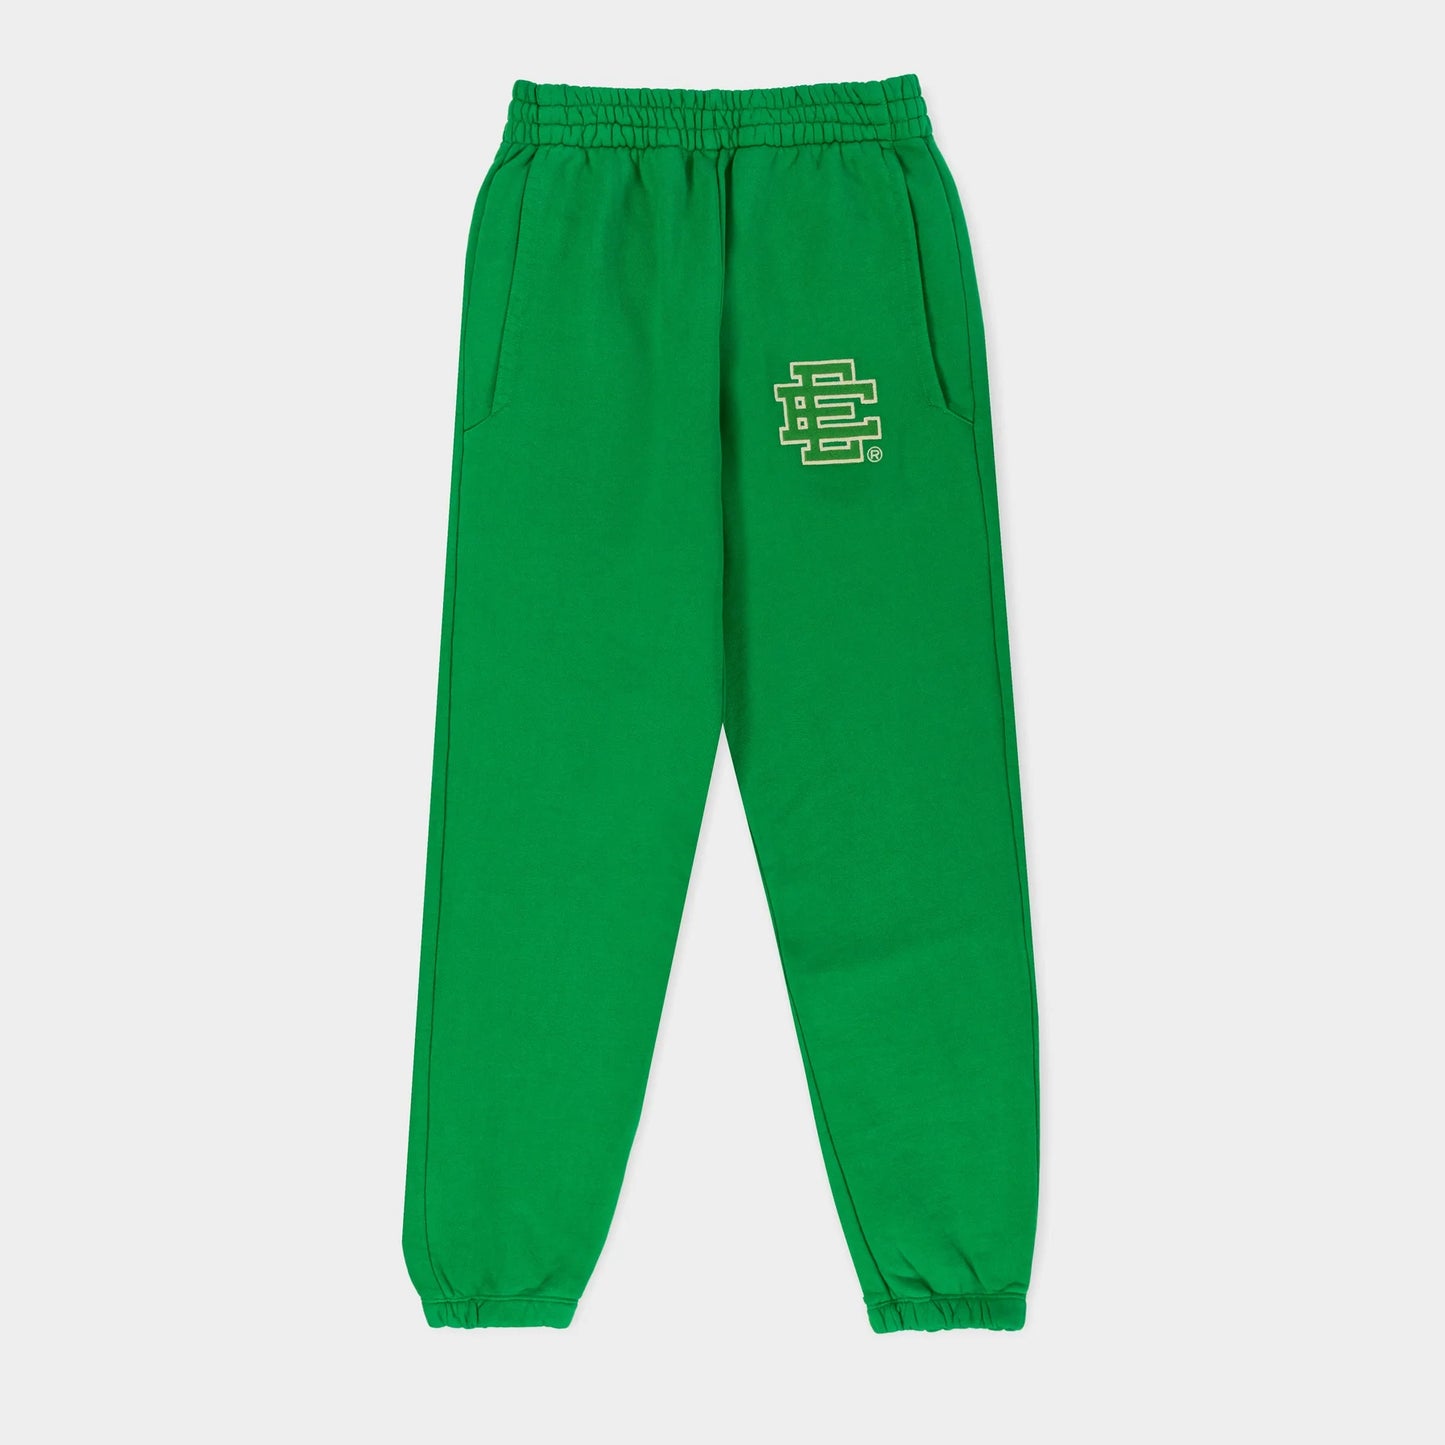 Eric Emanuel Kelly Green Embroidery Sweatpants Front VIew